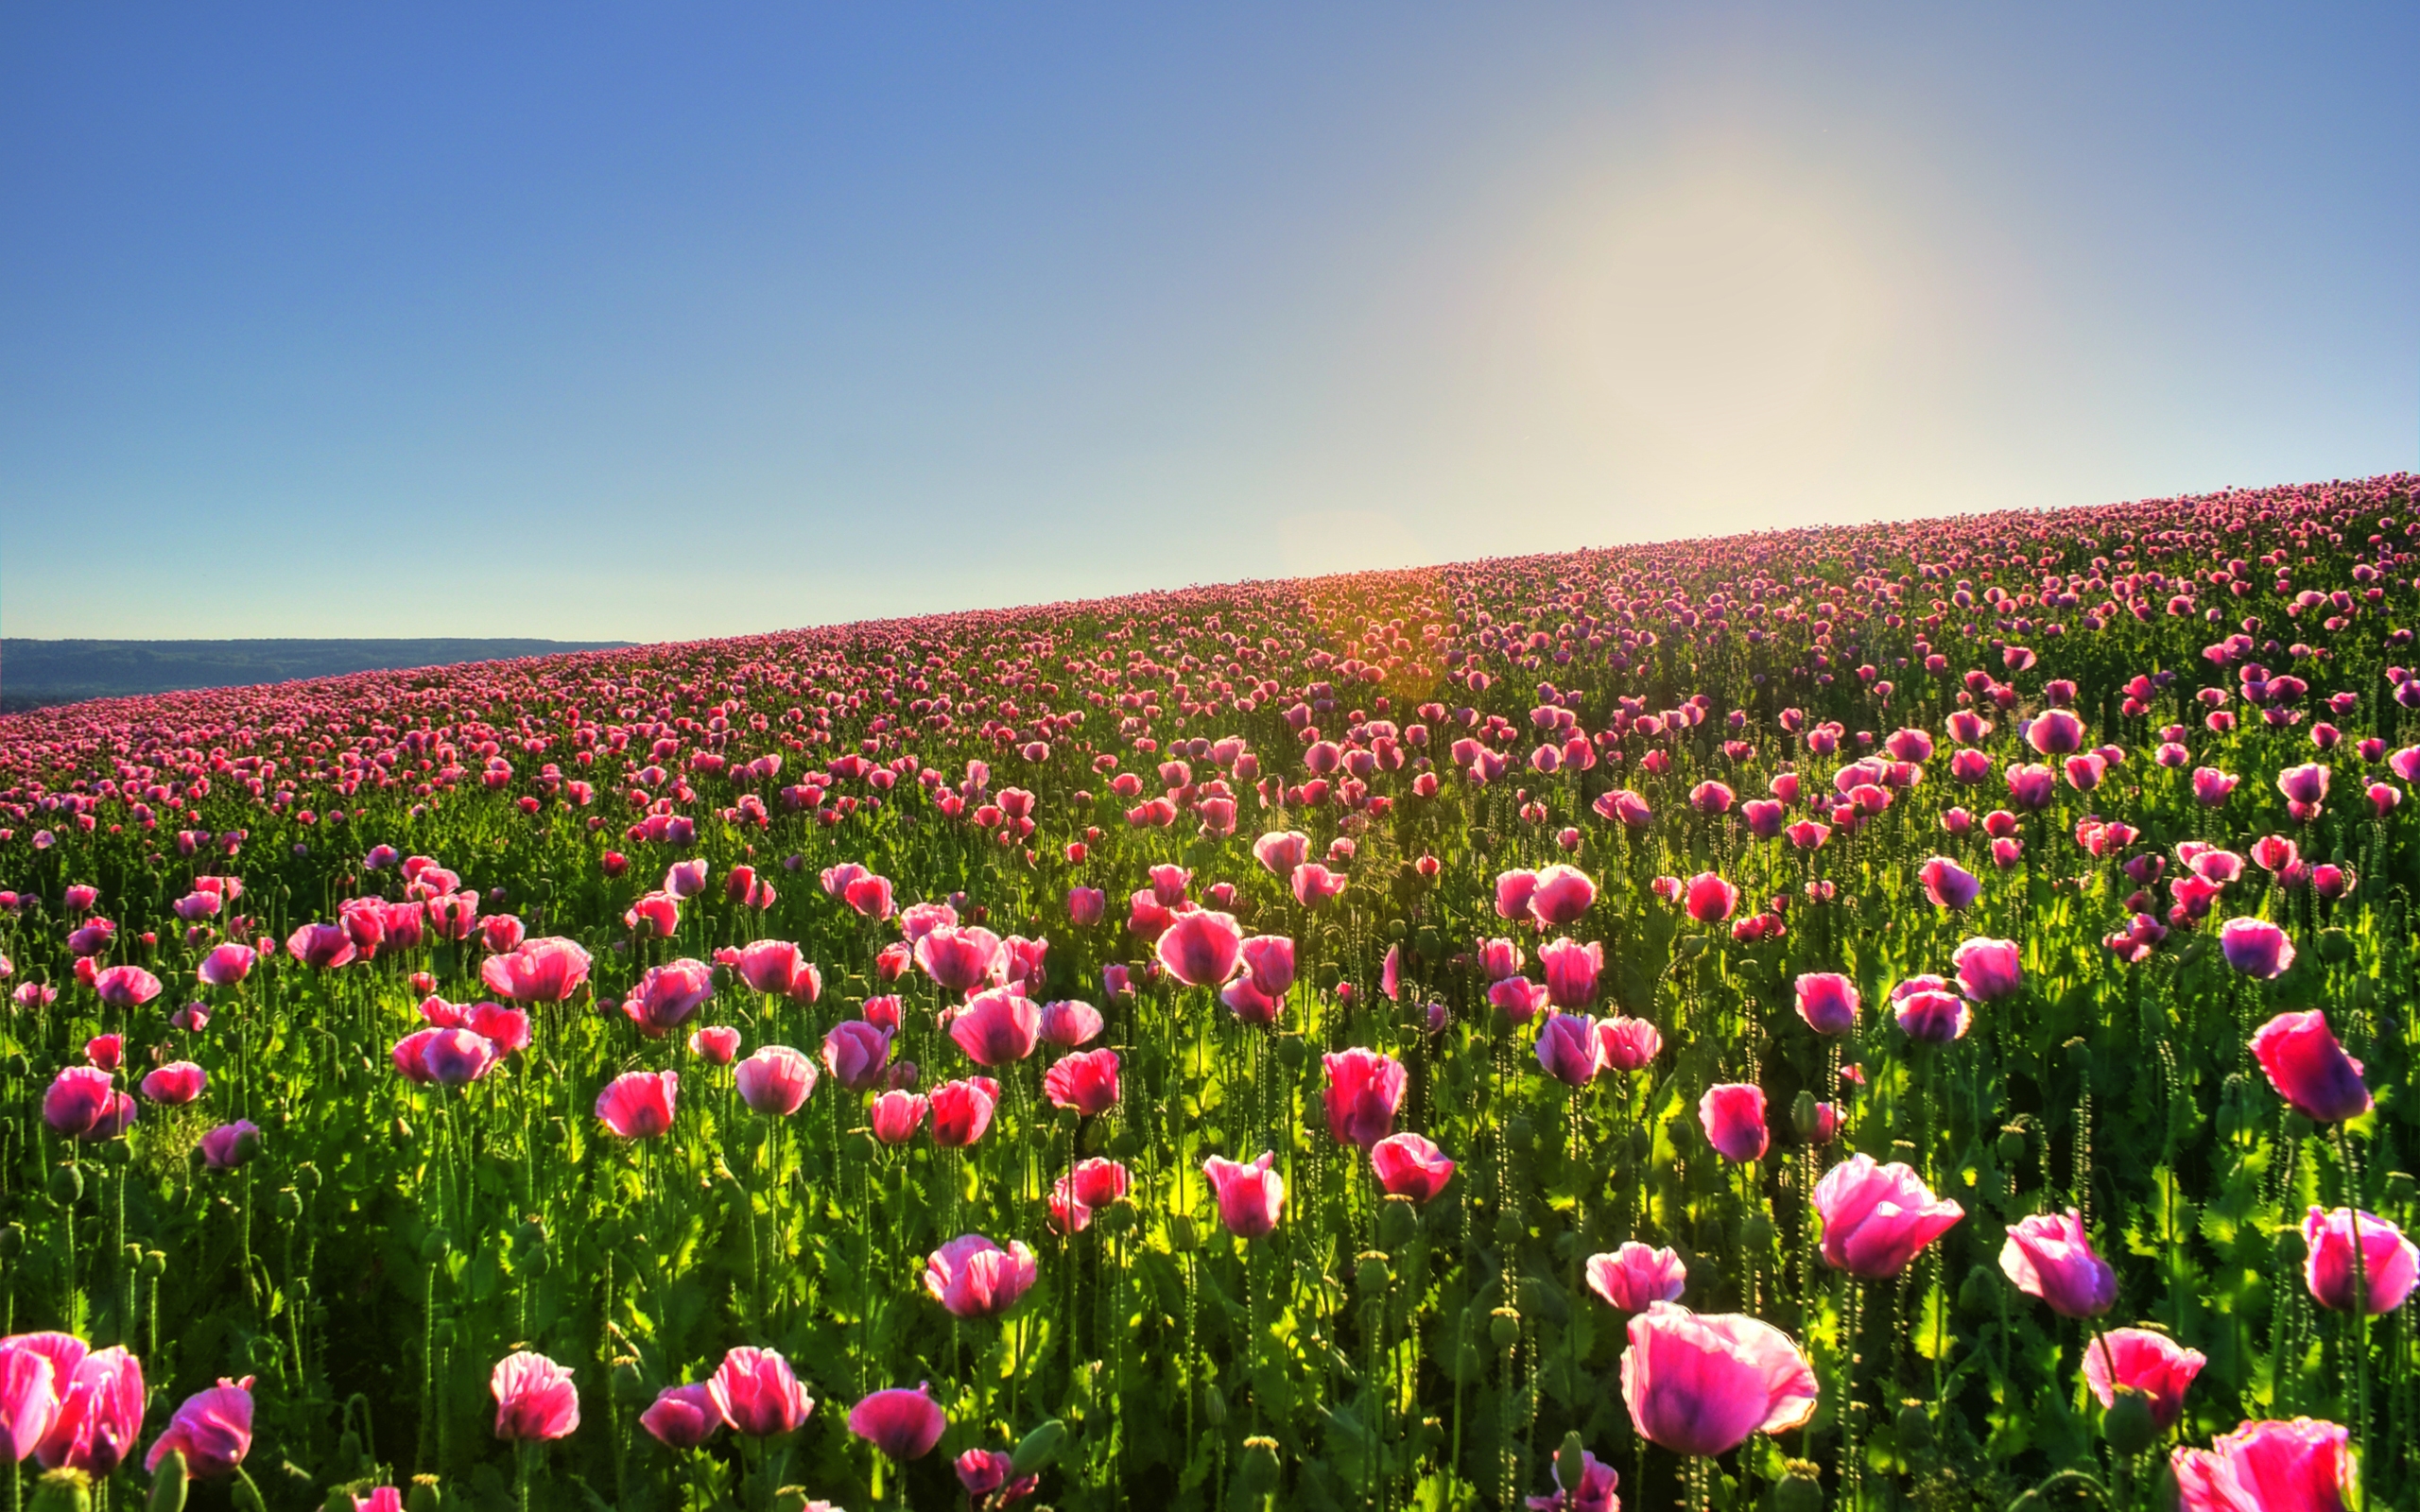 A large field of pink poppies